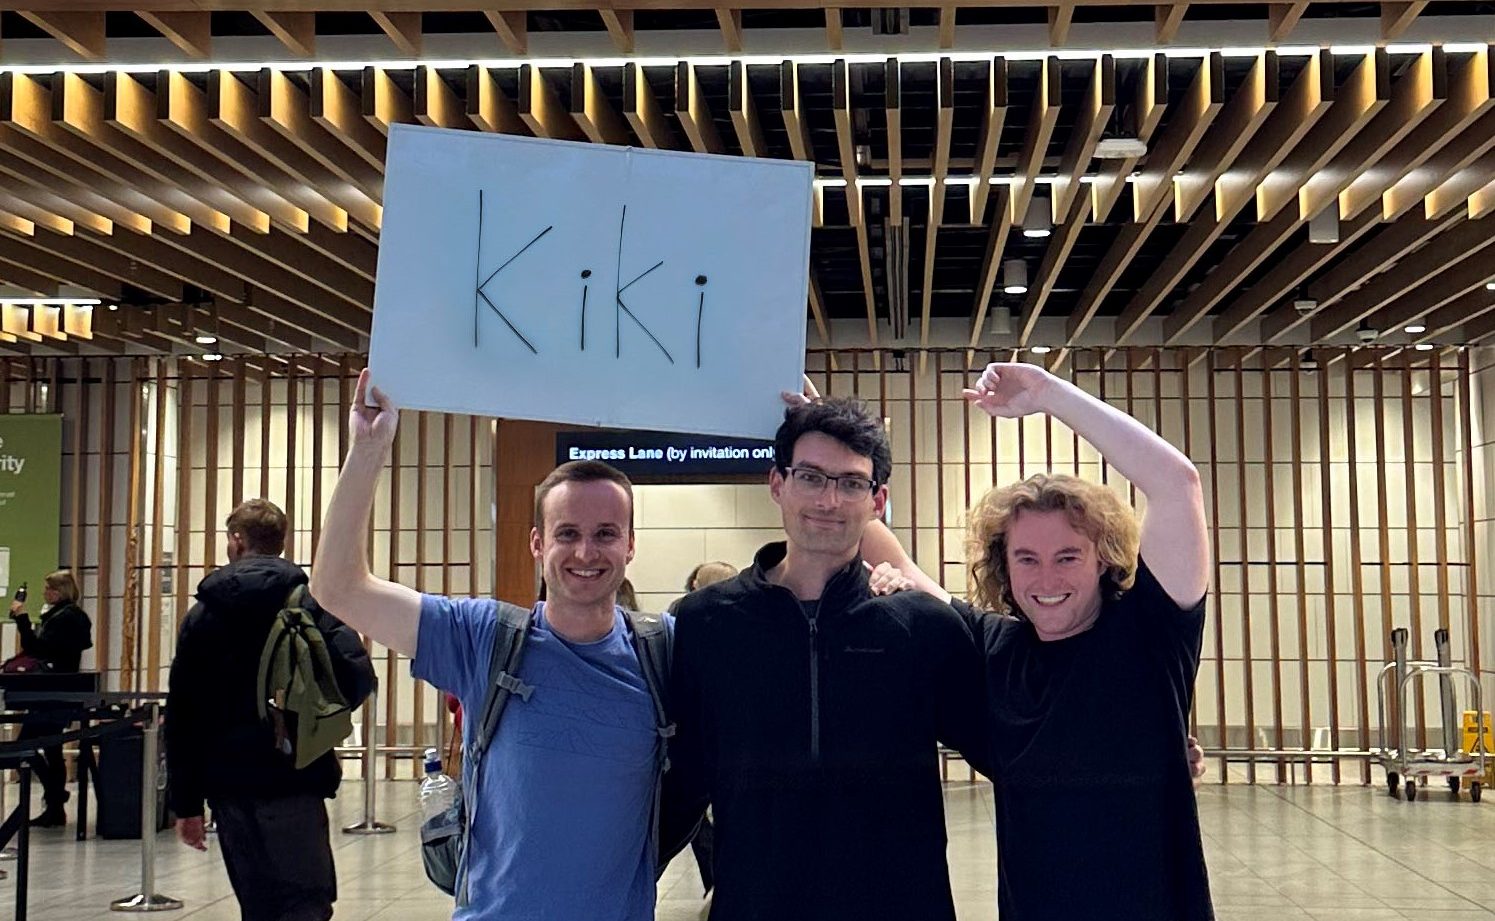 Subletting app Kiki raises $6M by using dating app concepts to match listings and renters